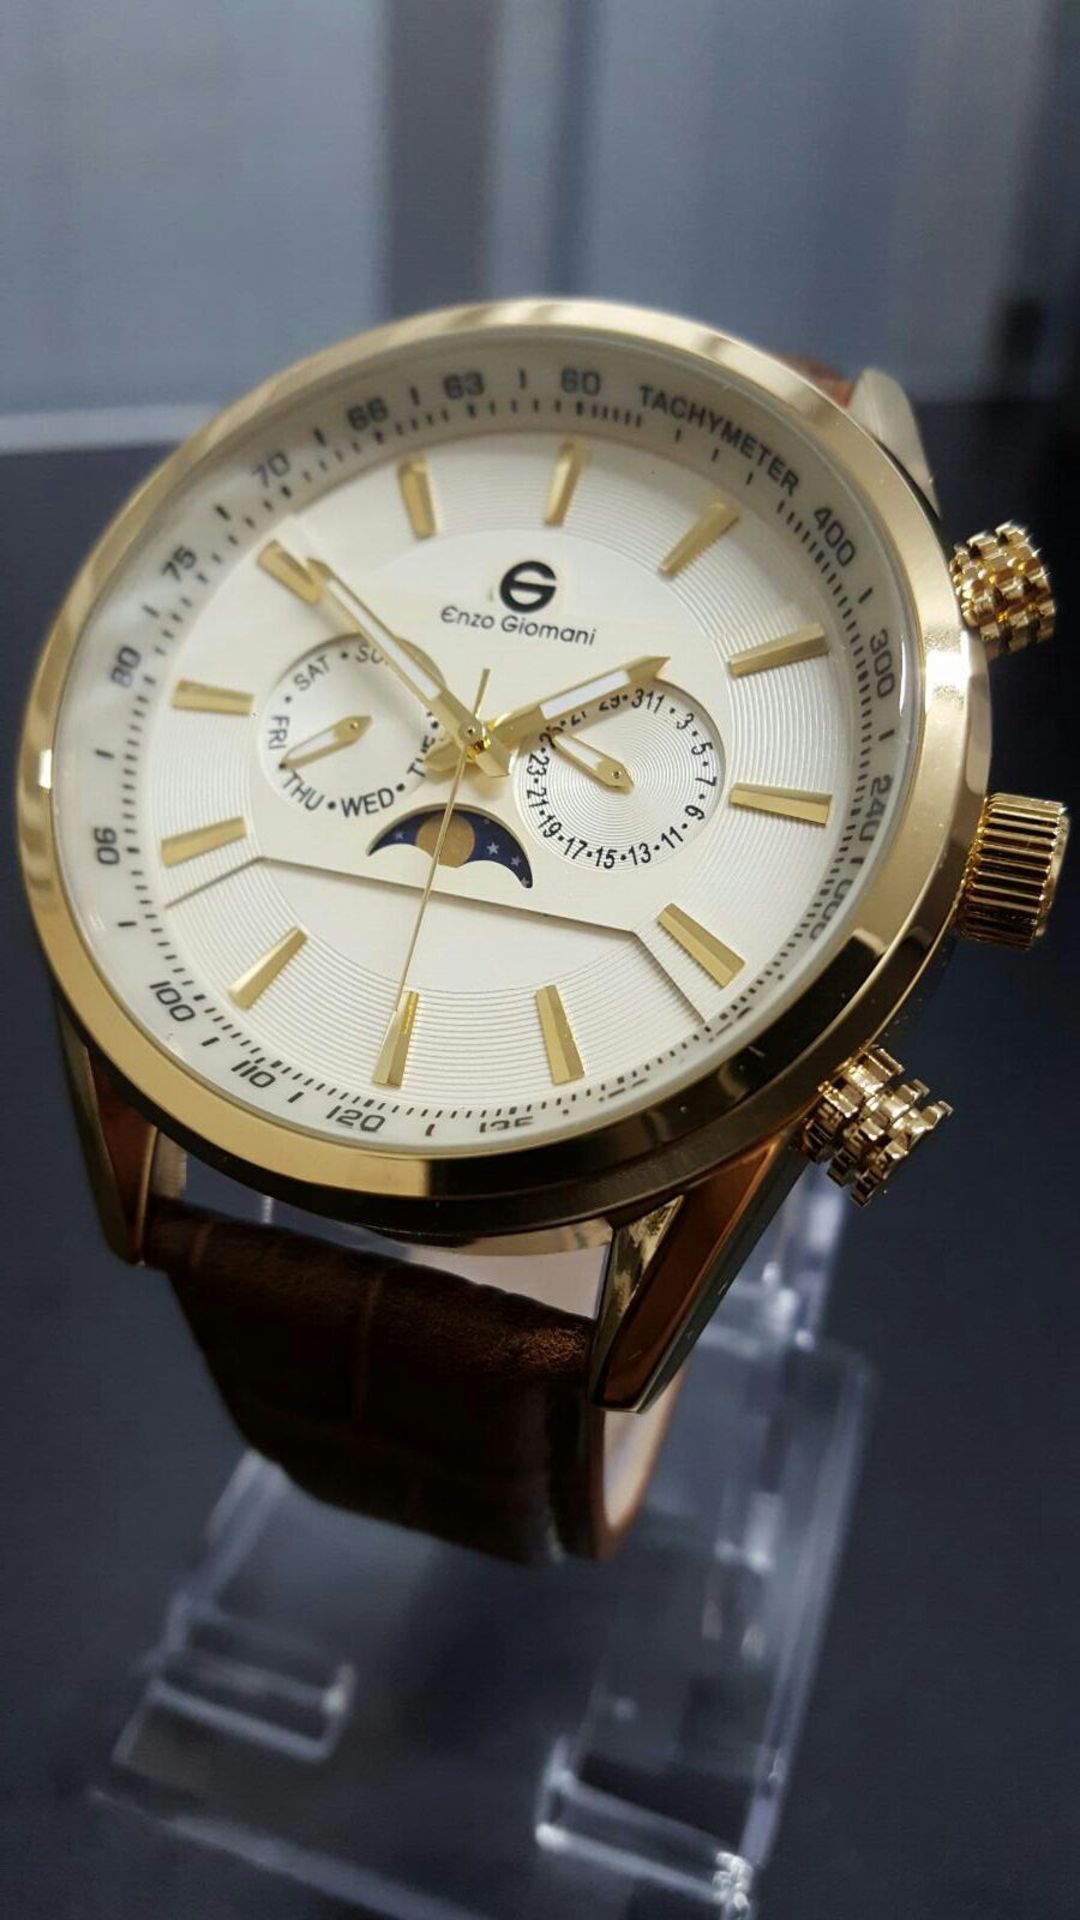 BRAND NEW ENZO GIOMANI EG0023, GENTS GOLD TONE WITH GOLD FACE WATCH, BROWN LEATHER STRAP, DAY/